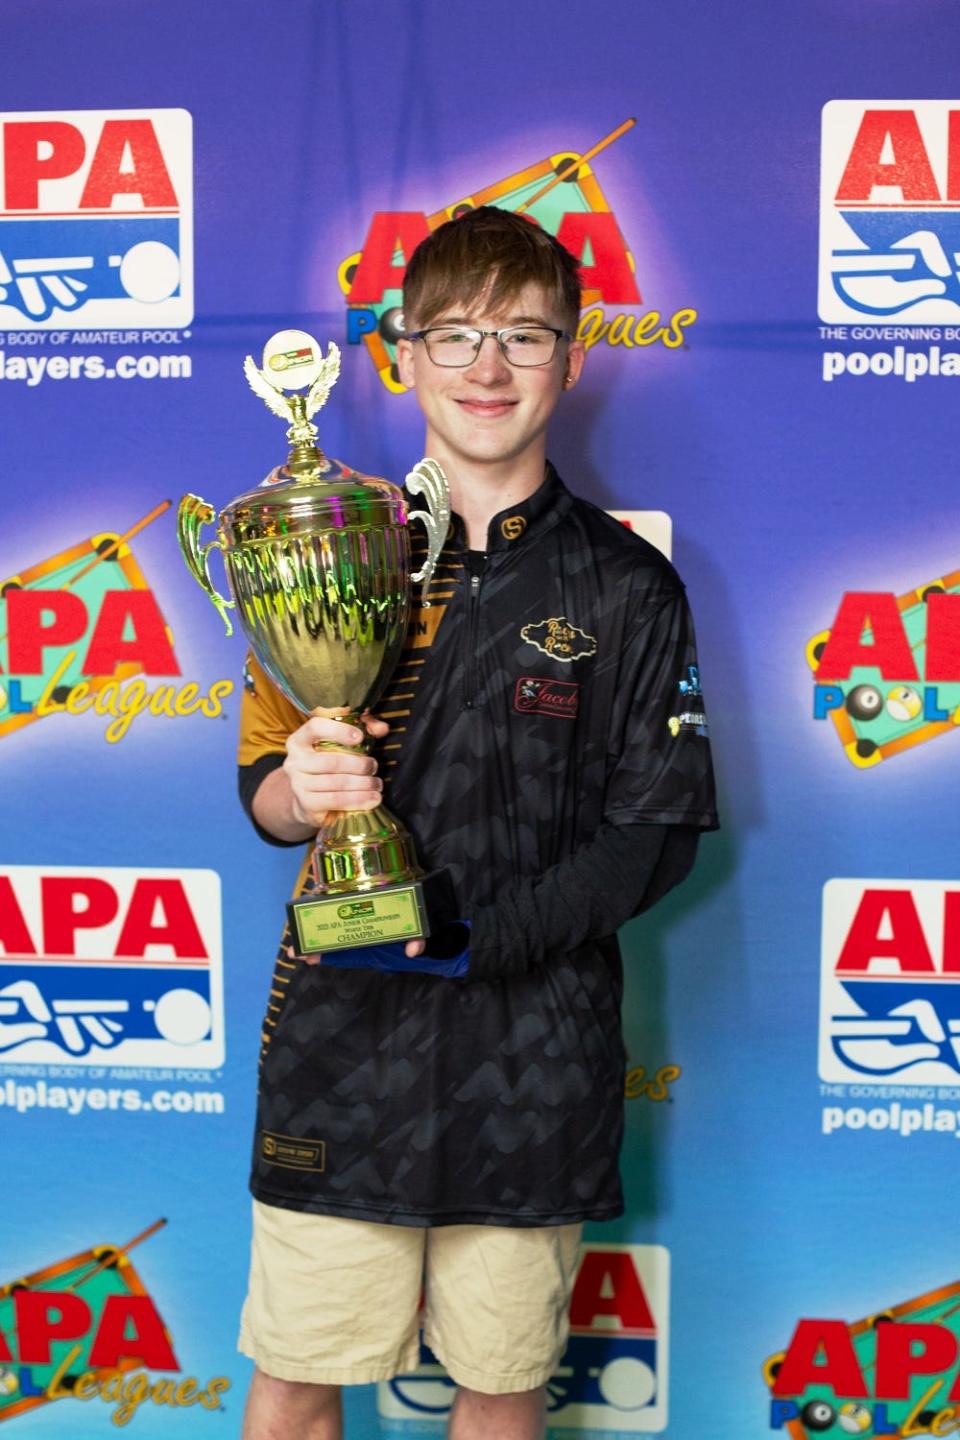 Brayden Rogers, 16, of Peoria, won the 2023 American Poolplayers Association Junior Pool Championship in St. Louis in late June.